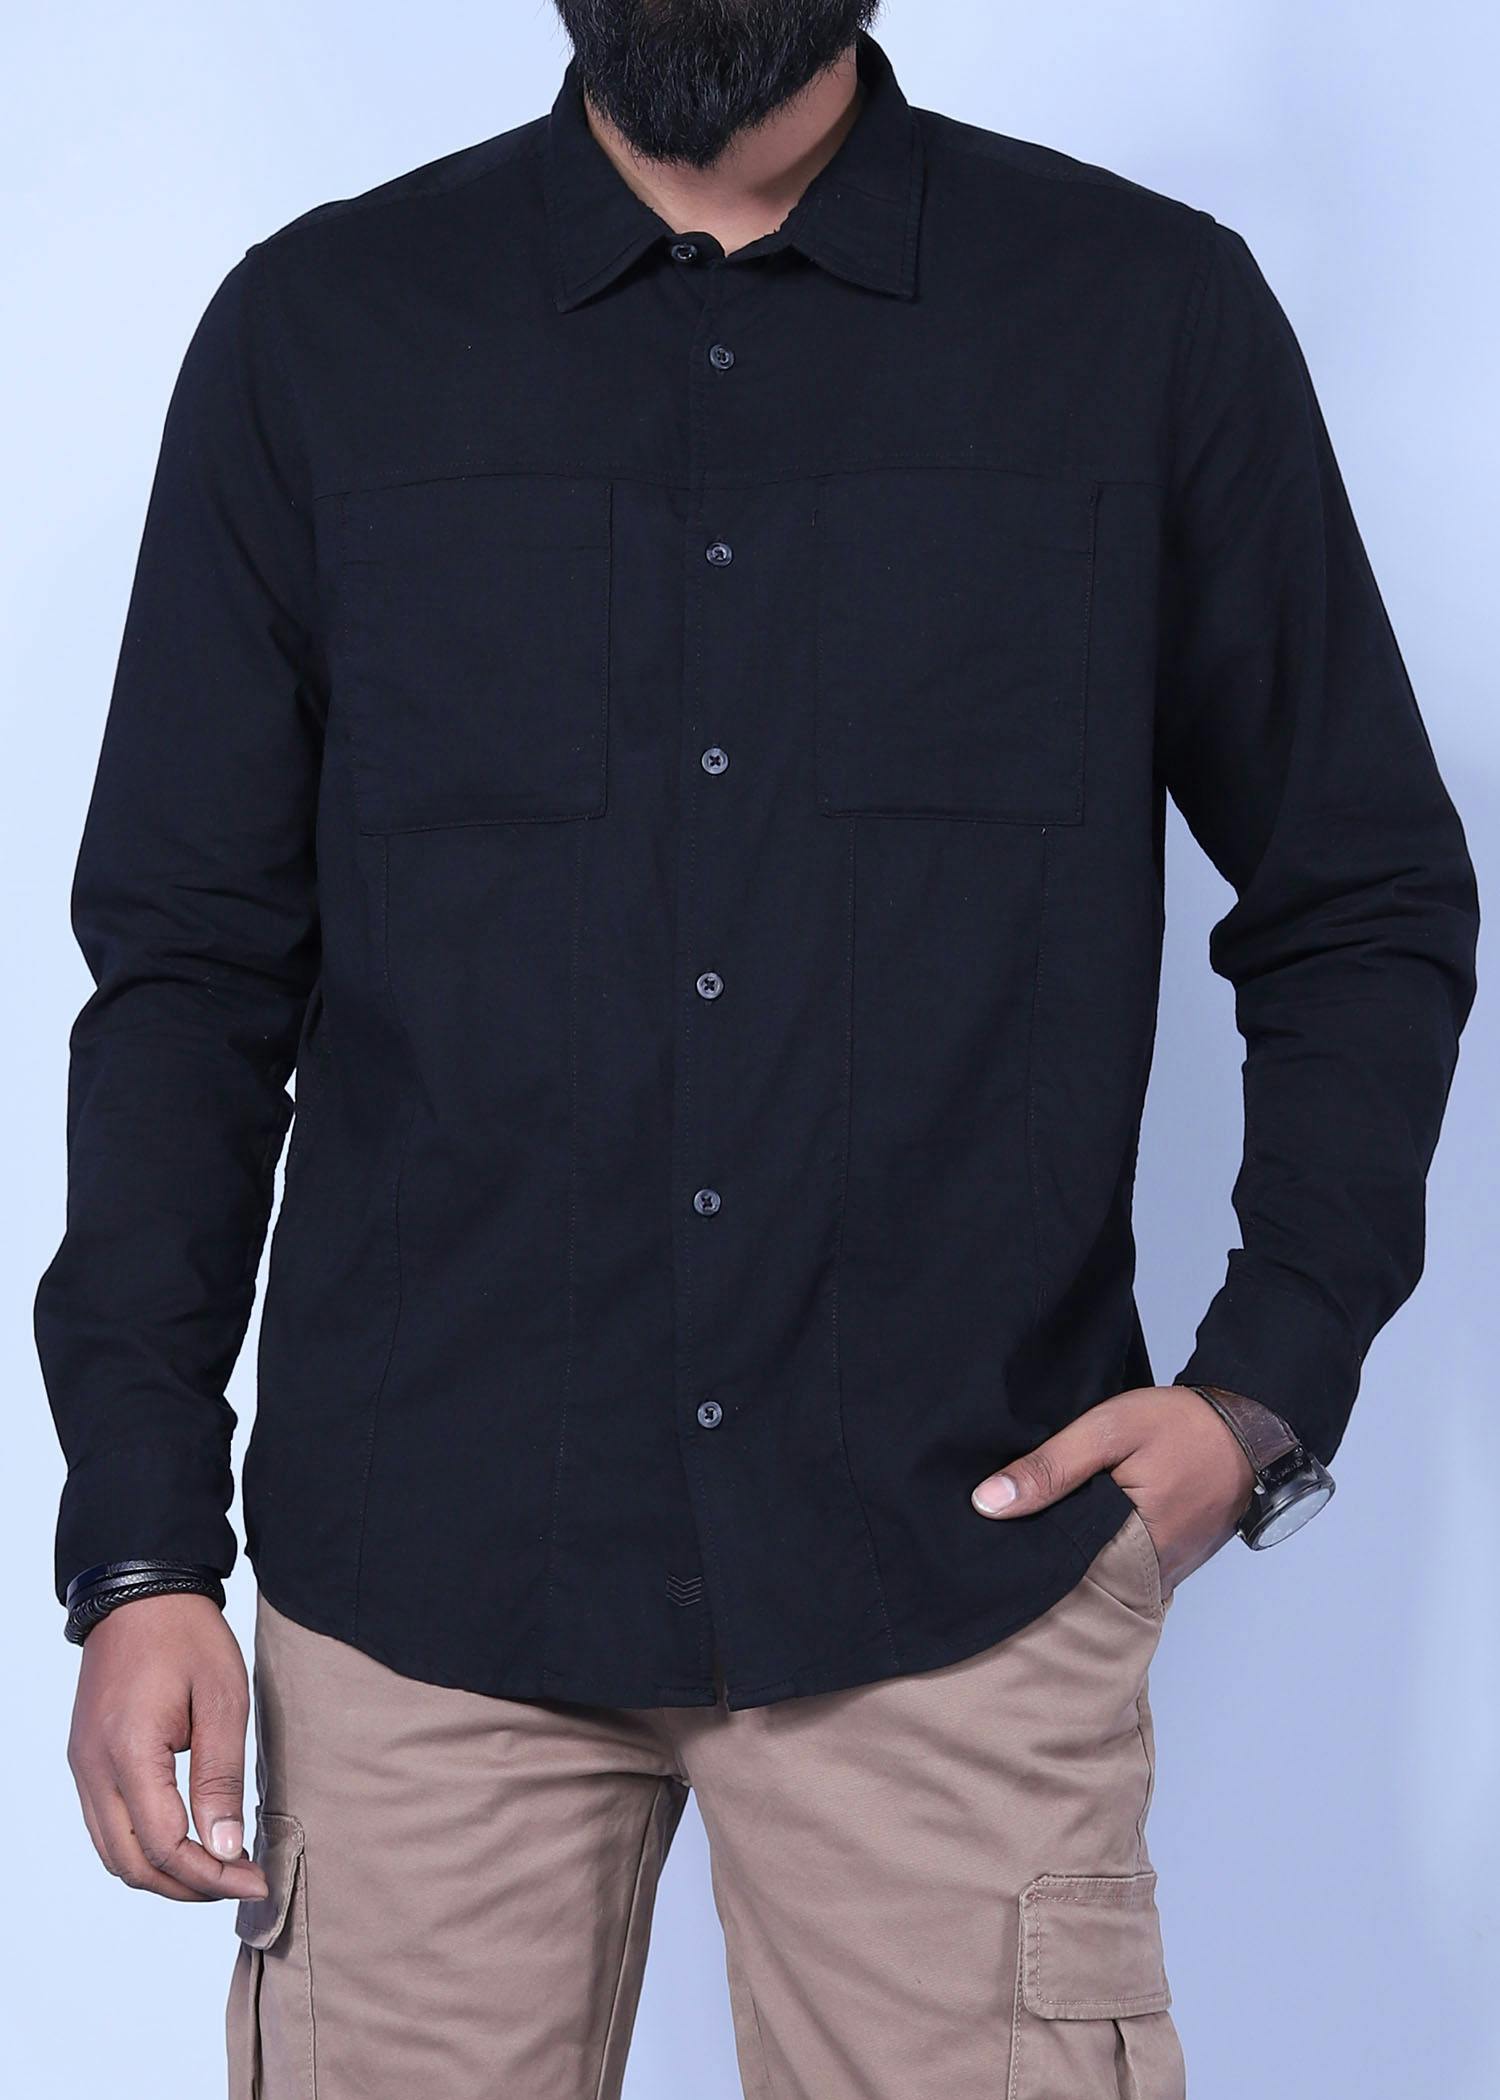 istanbul xviii ls shirt black color facecropped